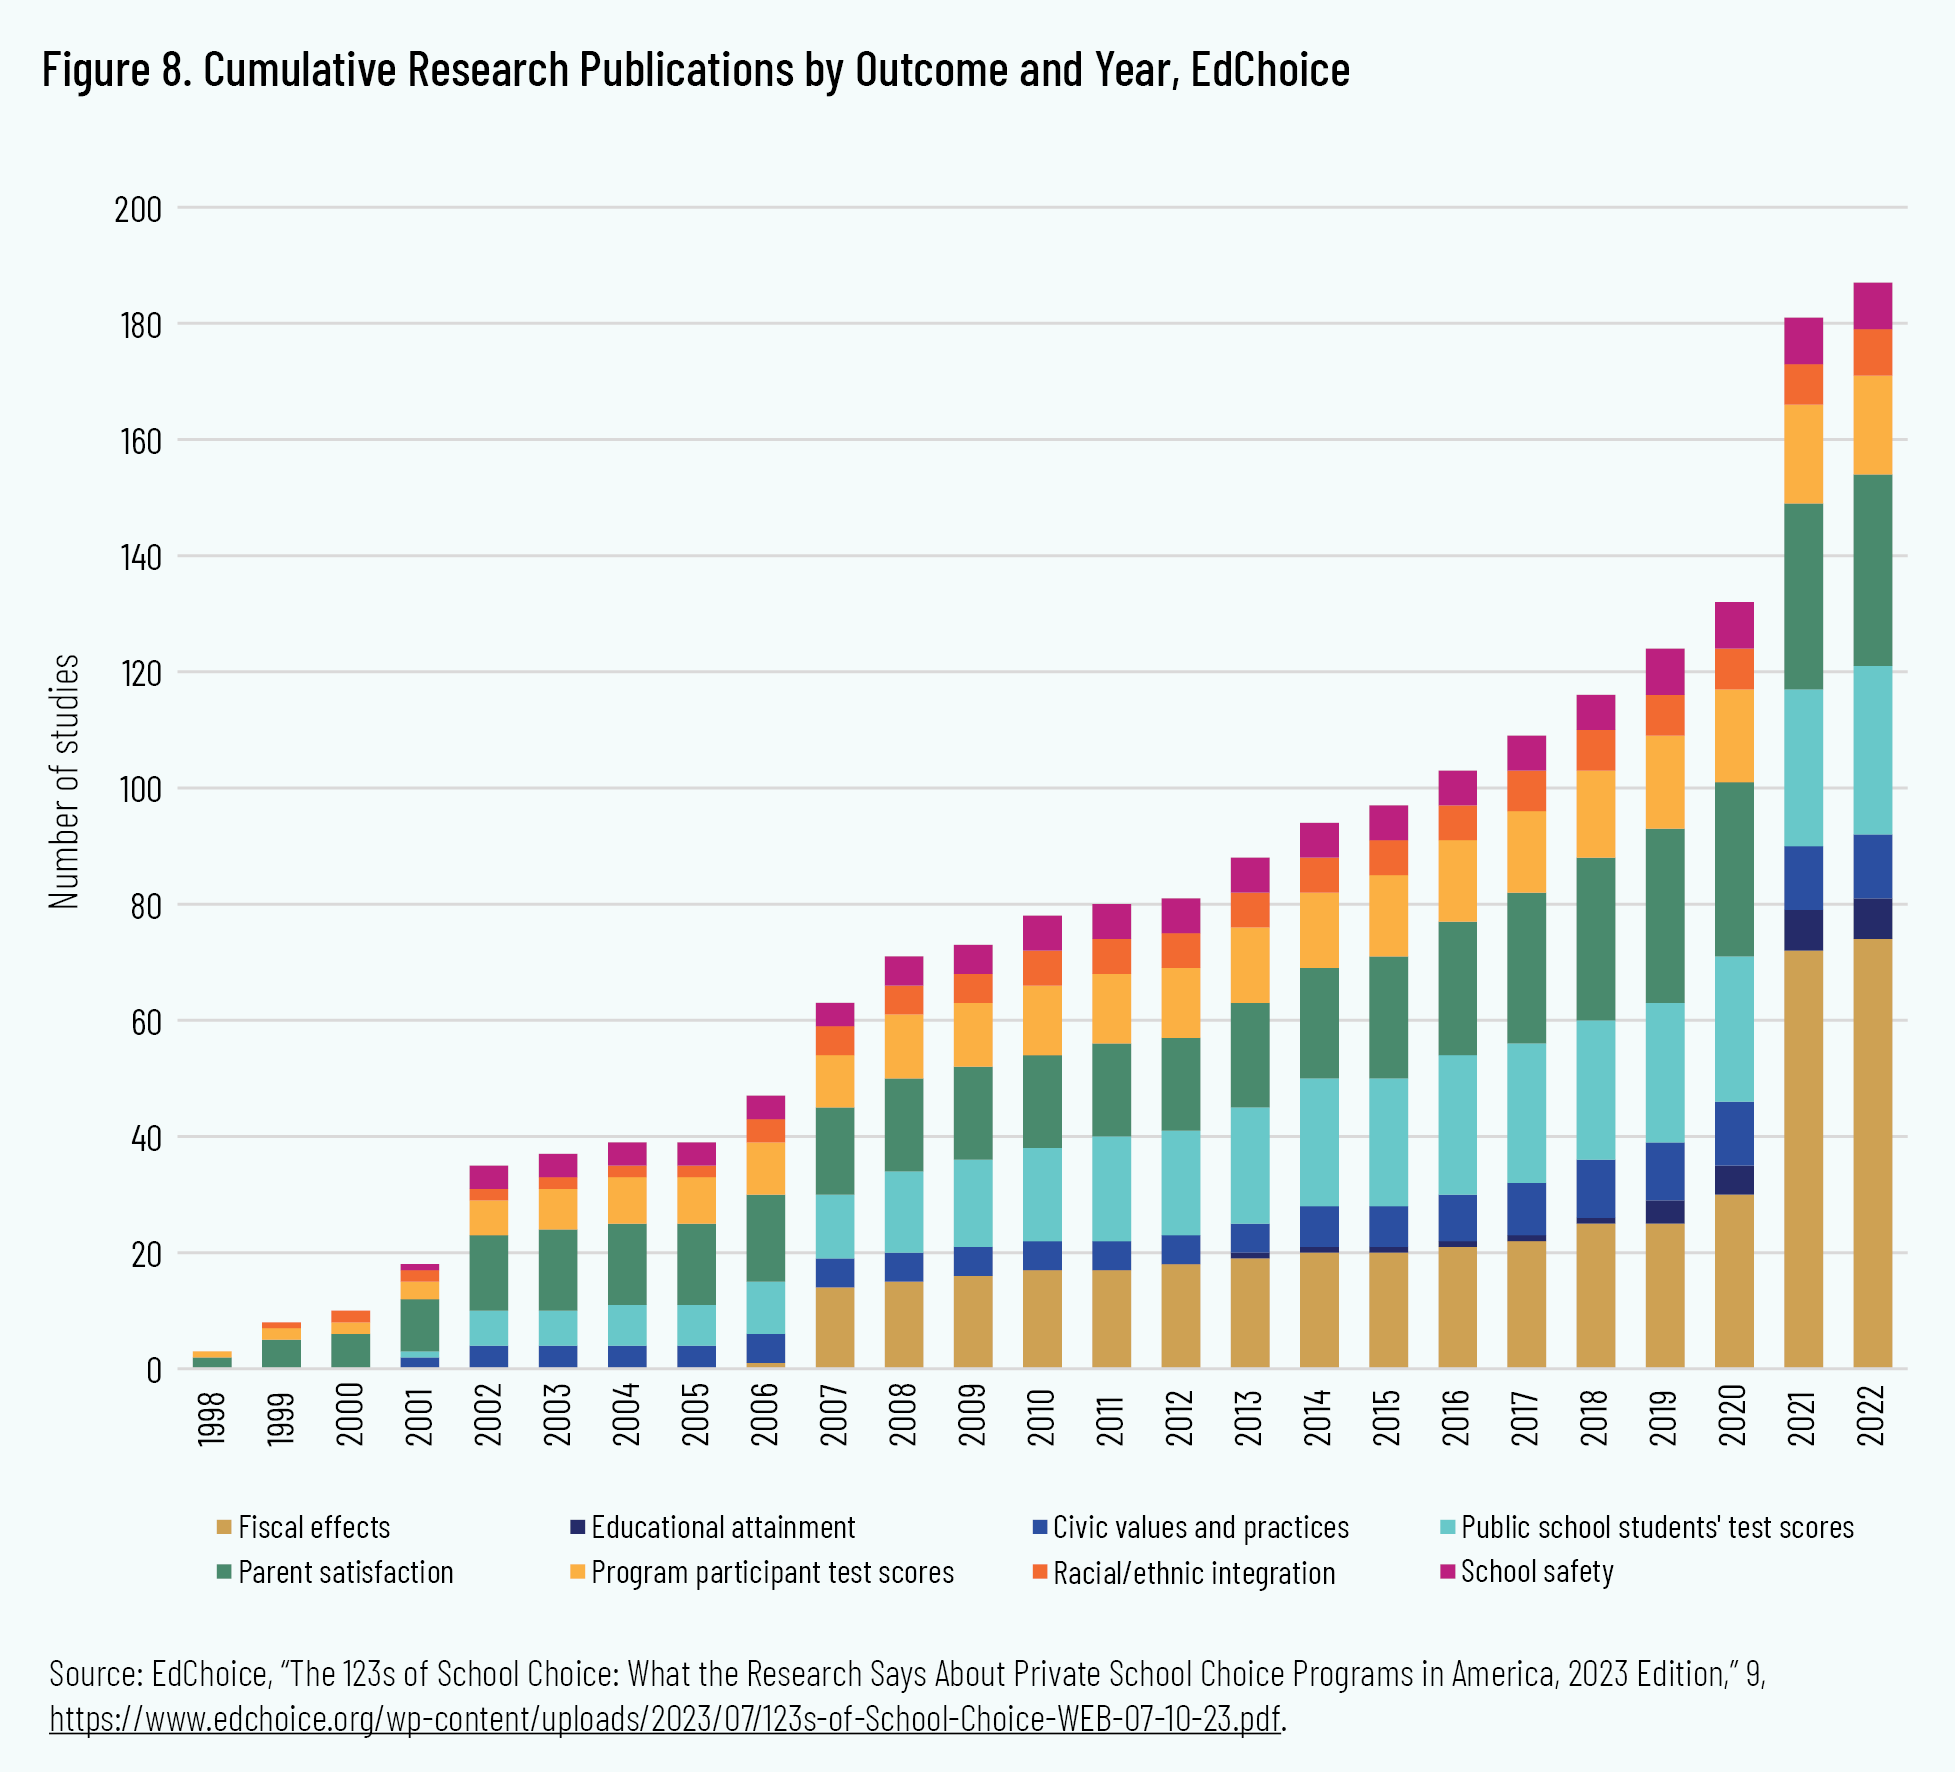 Figure 8. Cumulative Research Publications by Outcome and Year, EdChoice